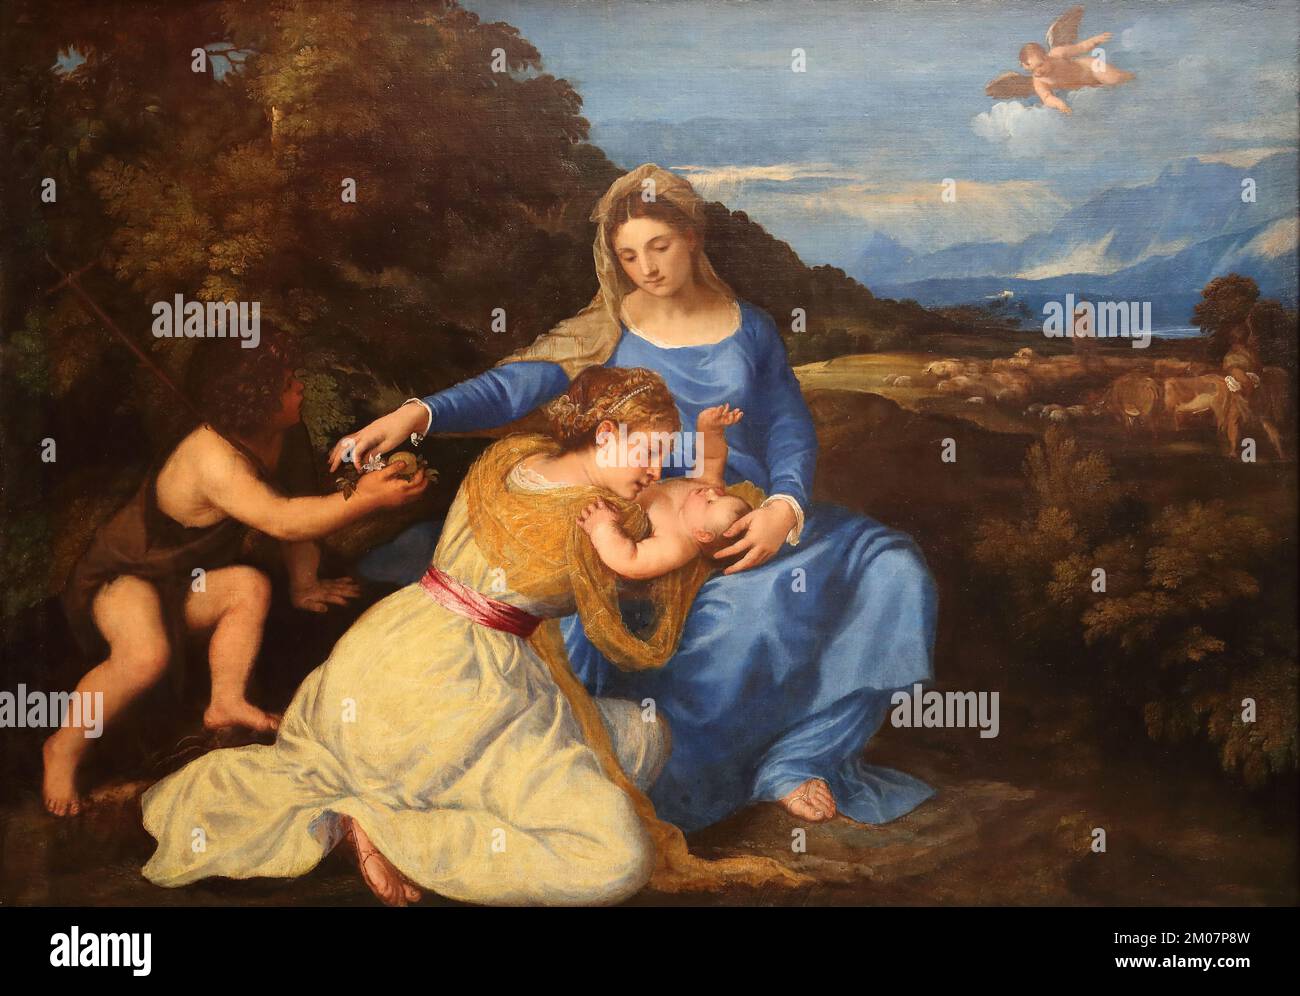 The Aldobrandini Madonna by Italian Renaissance painter Titian at the National Gallery, London, UK Stock Photo